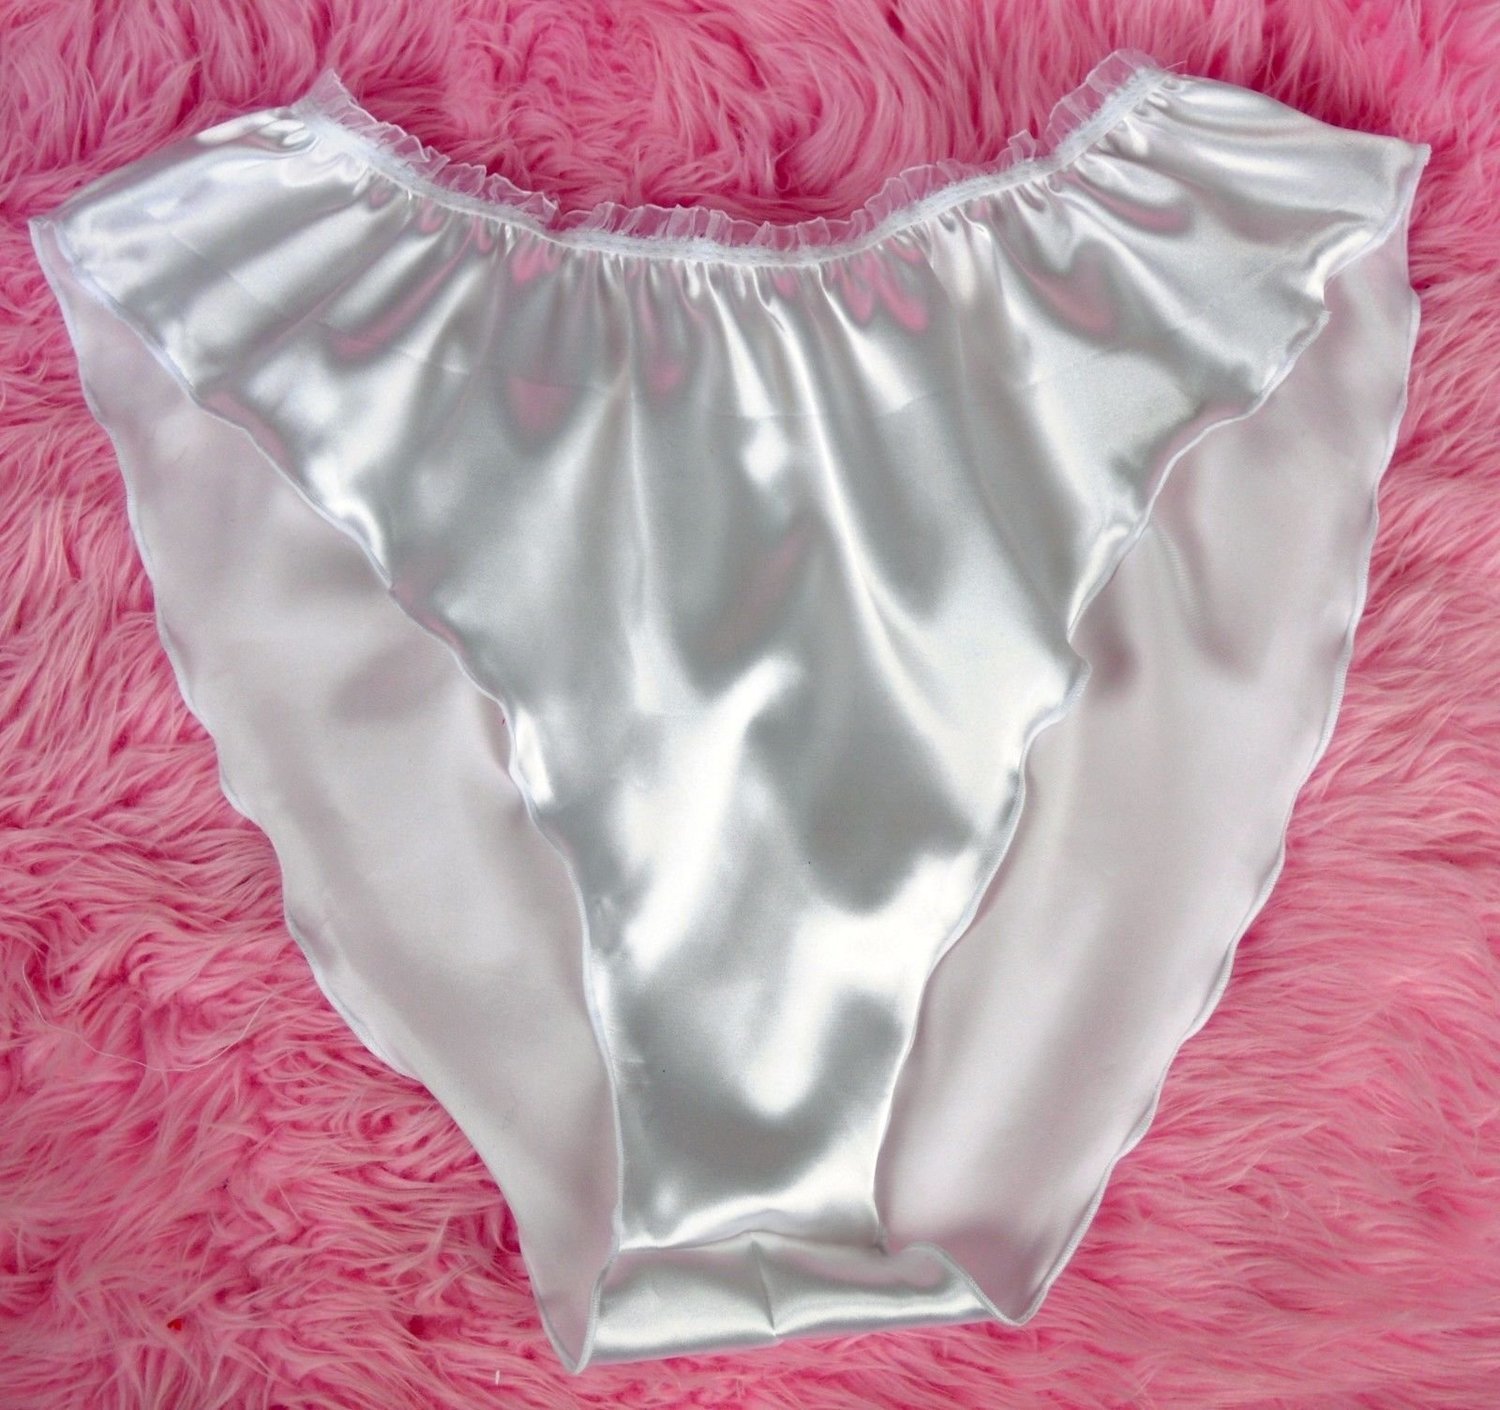 Ladies Vintage 80s style Soft Silky Satin Shiny high gloss flutter tap panties OS Light Colors